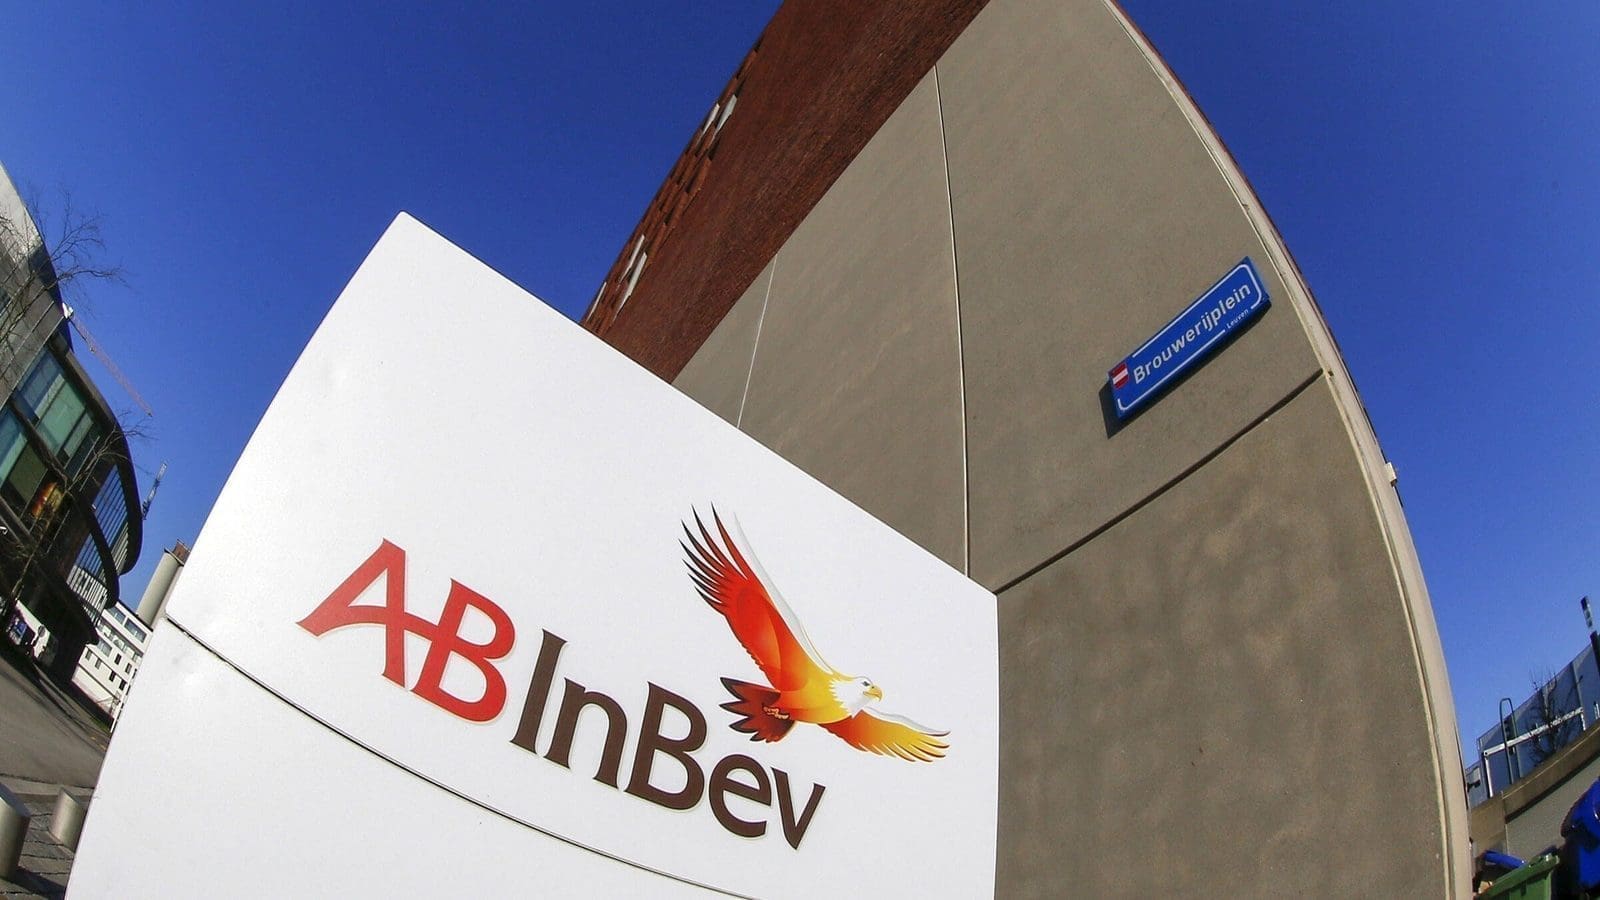 AB InBev’s sales exceed pre-pandemic levels, but inflation eats into Q2 profits